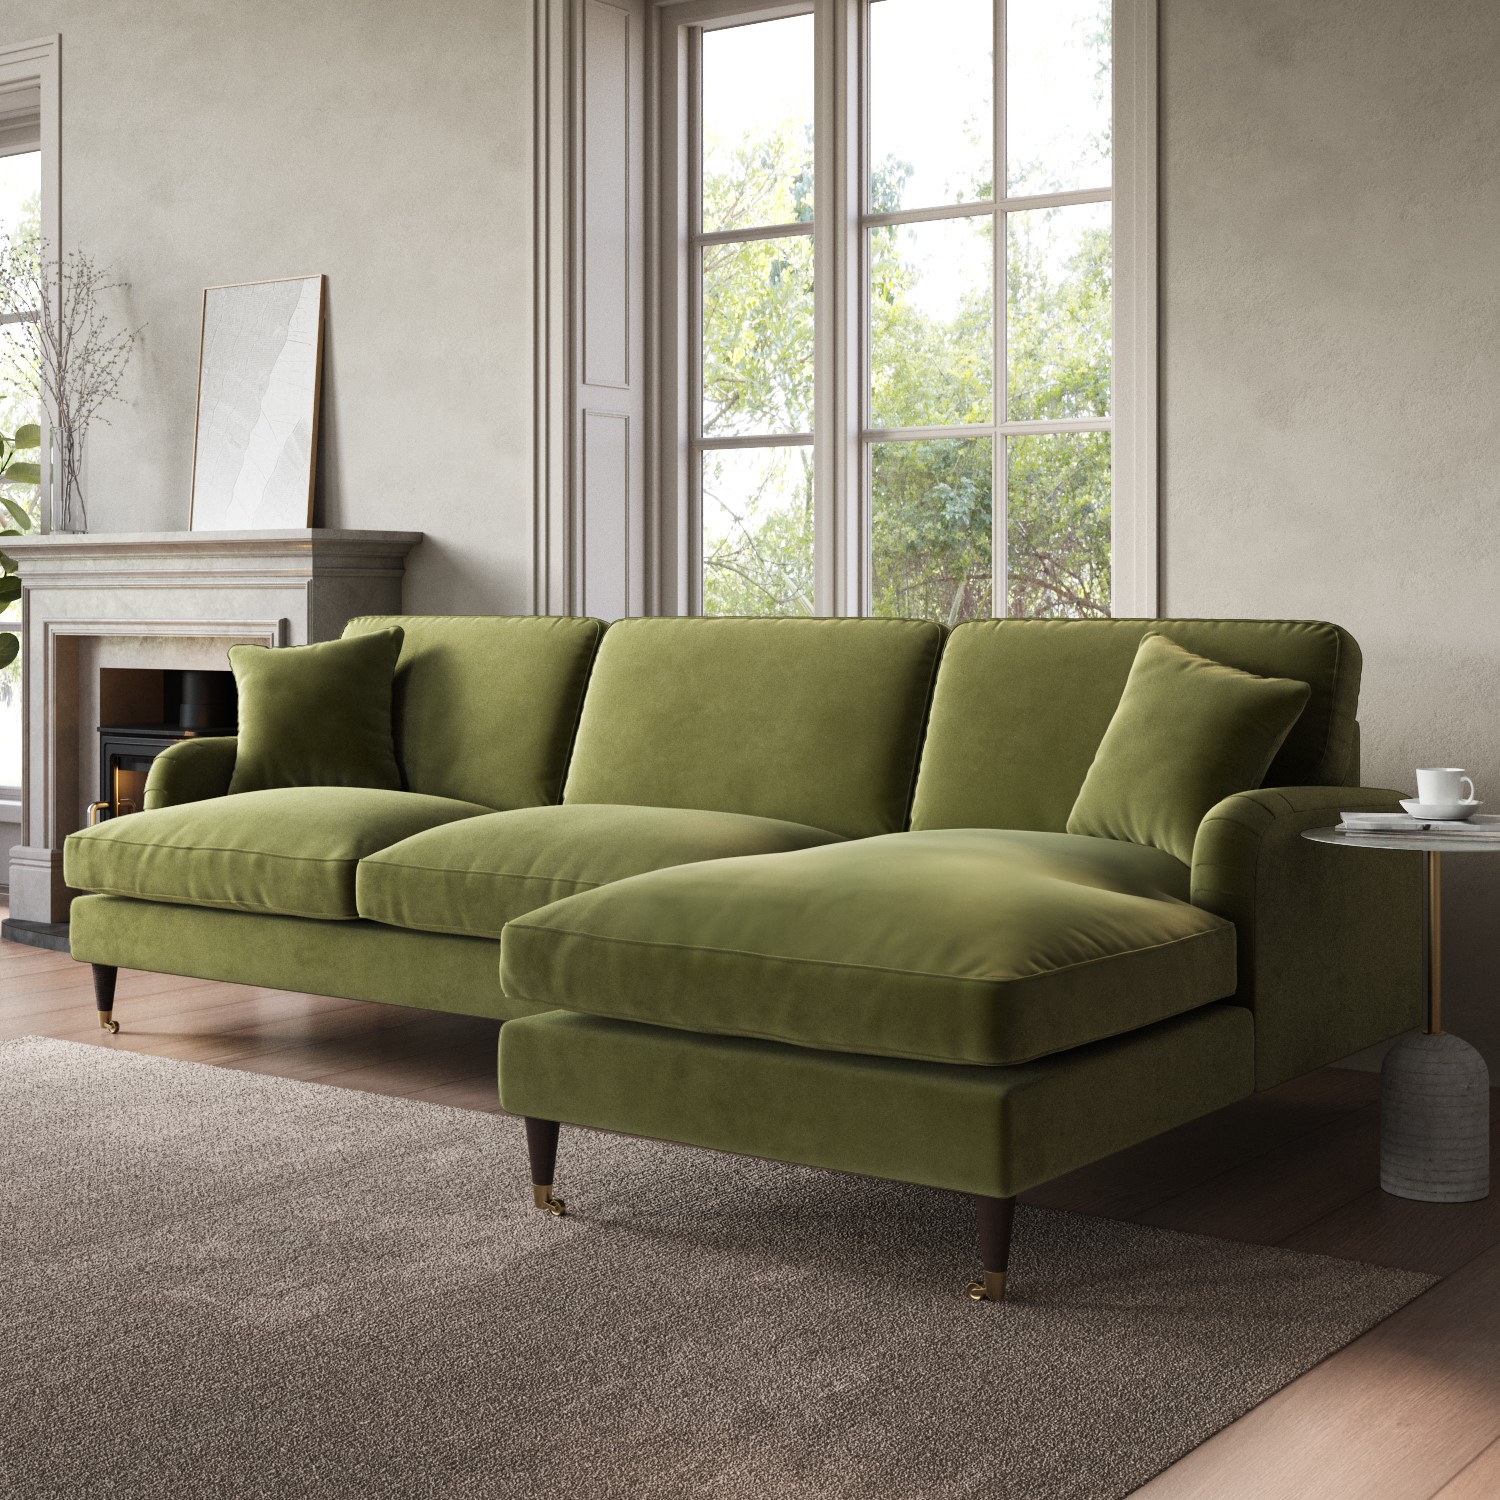 Read more about Olive green velvet right hand l shaped sofa seats 4 payton